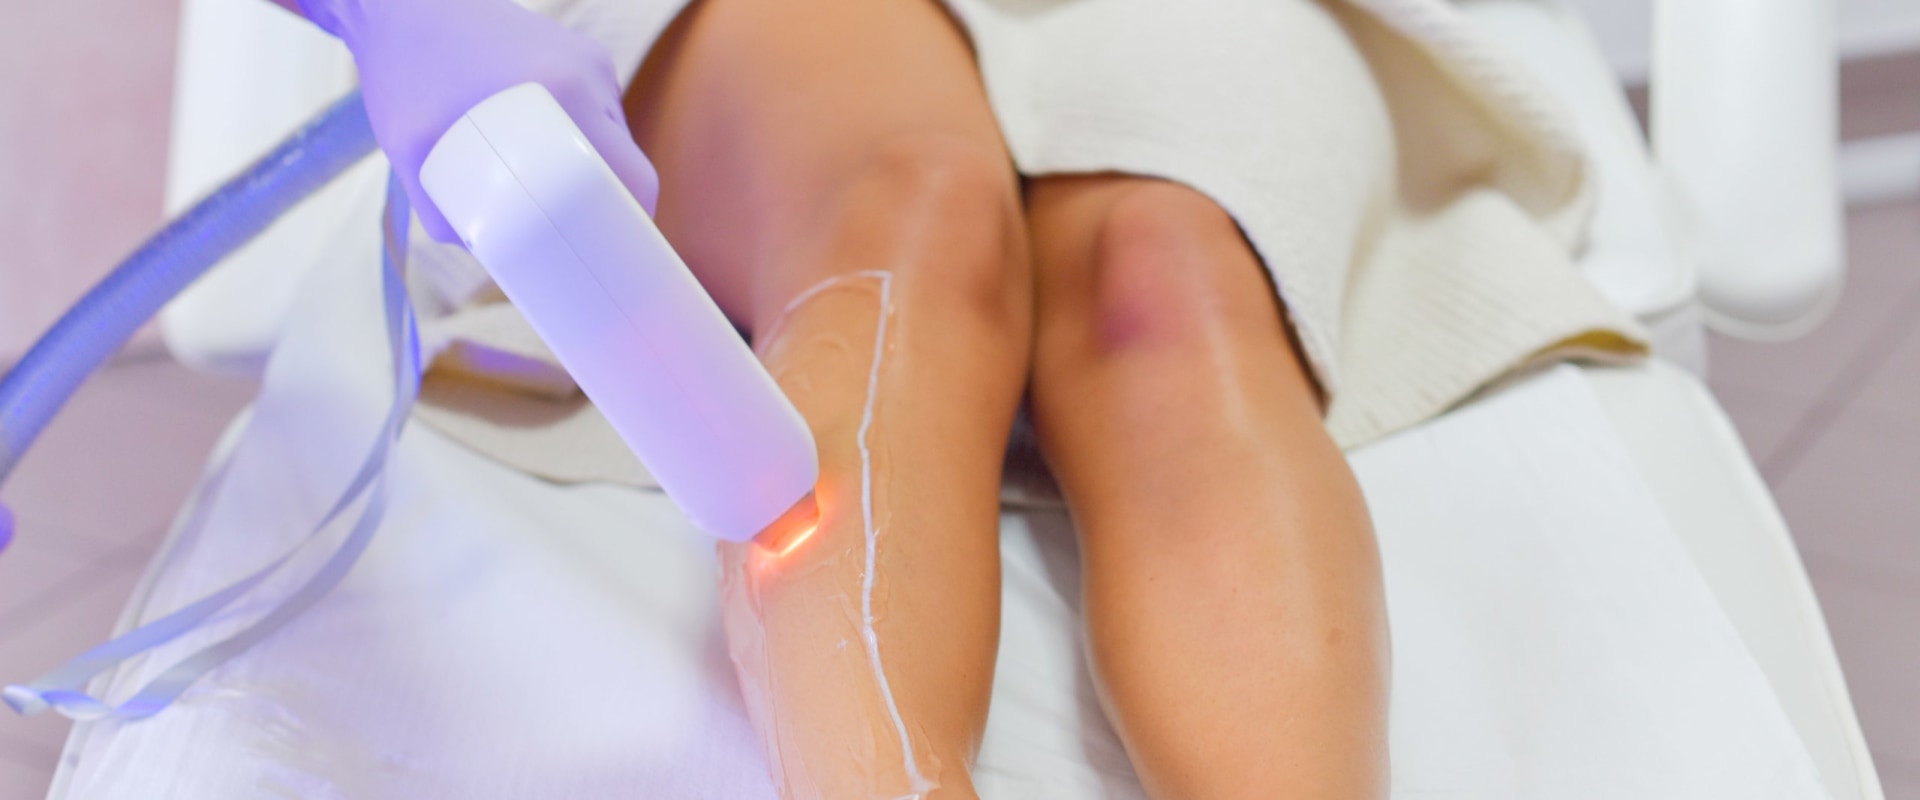 Is Laser Hair Removal Safe? An Expert's Guide to the Pros and Cons